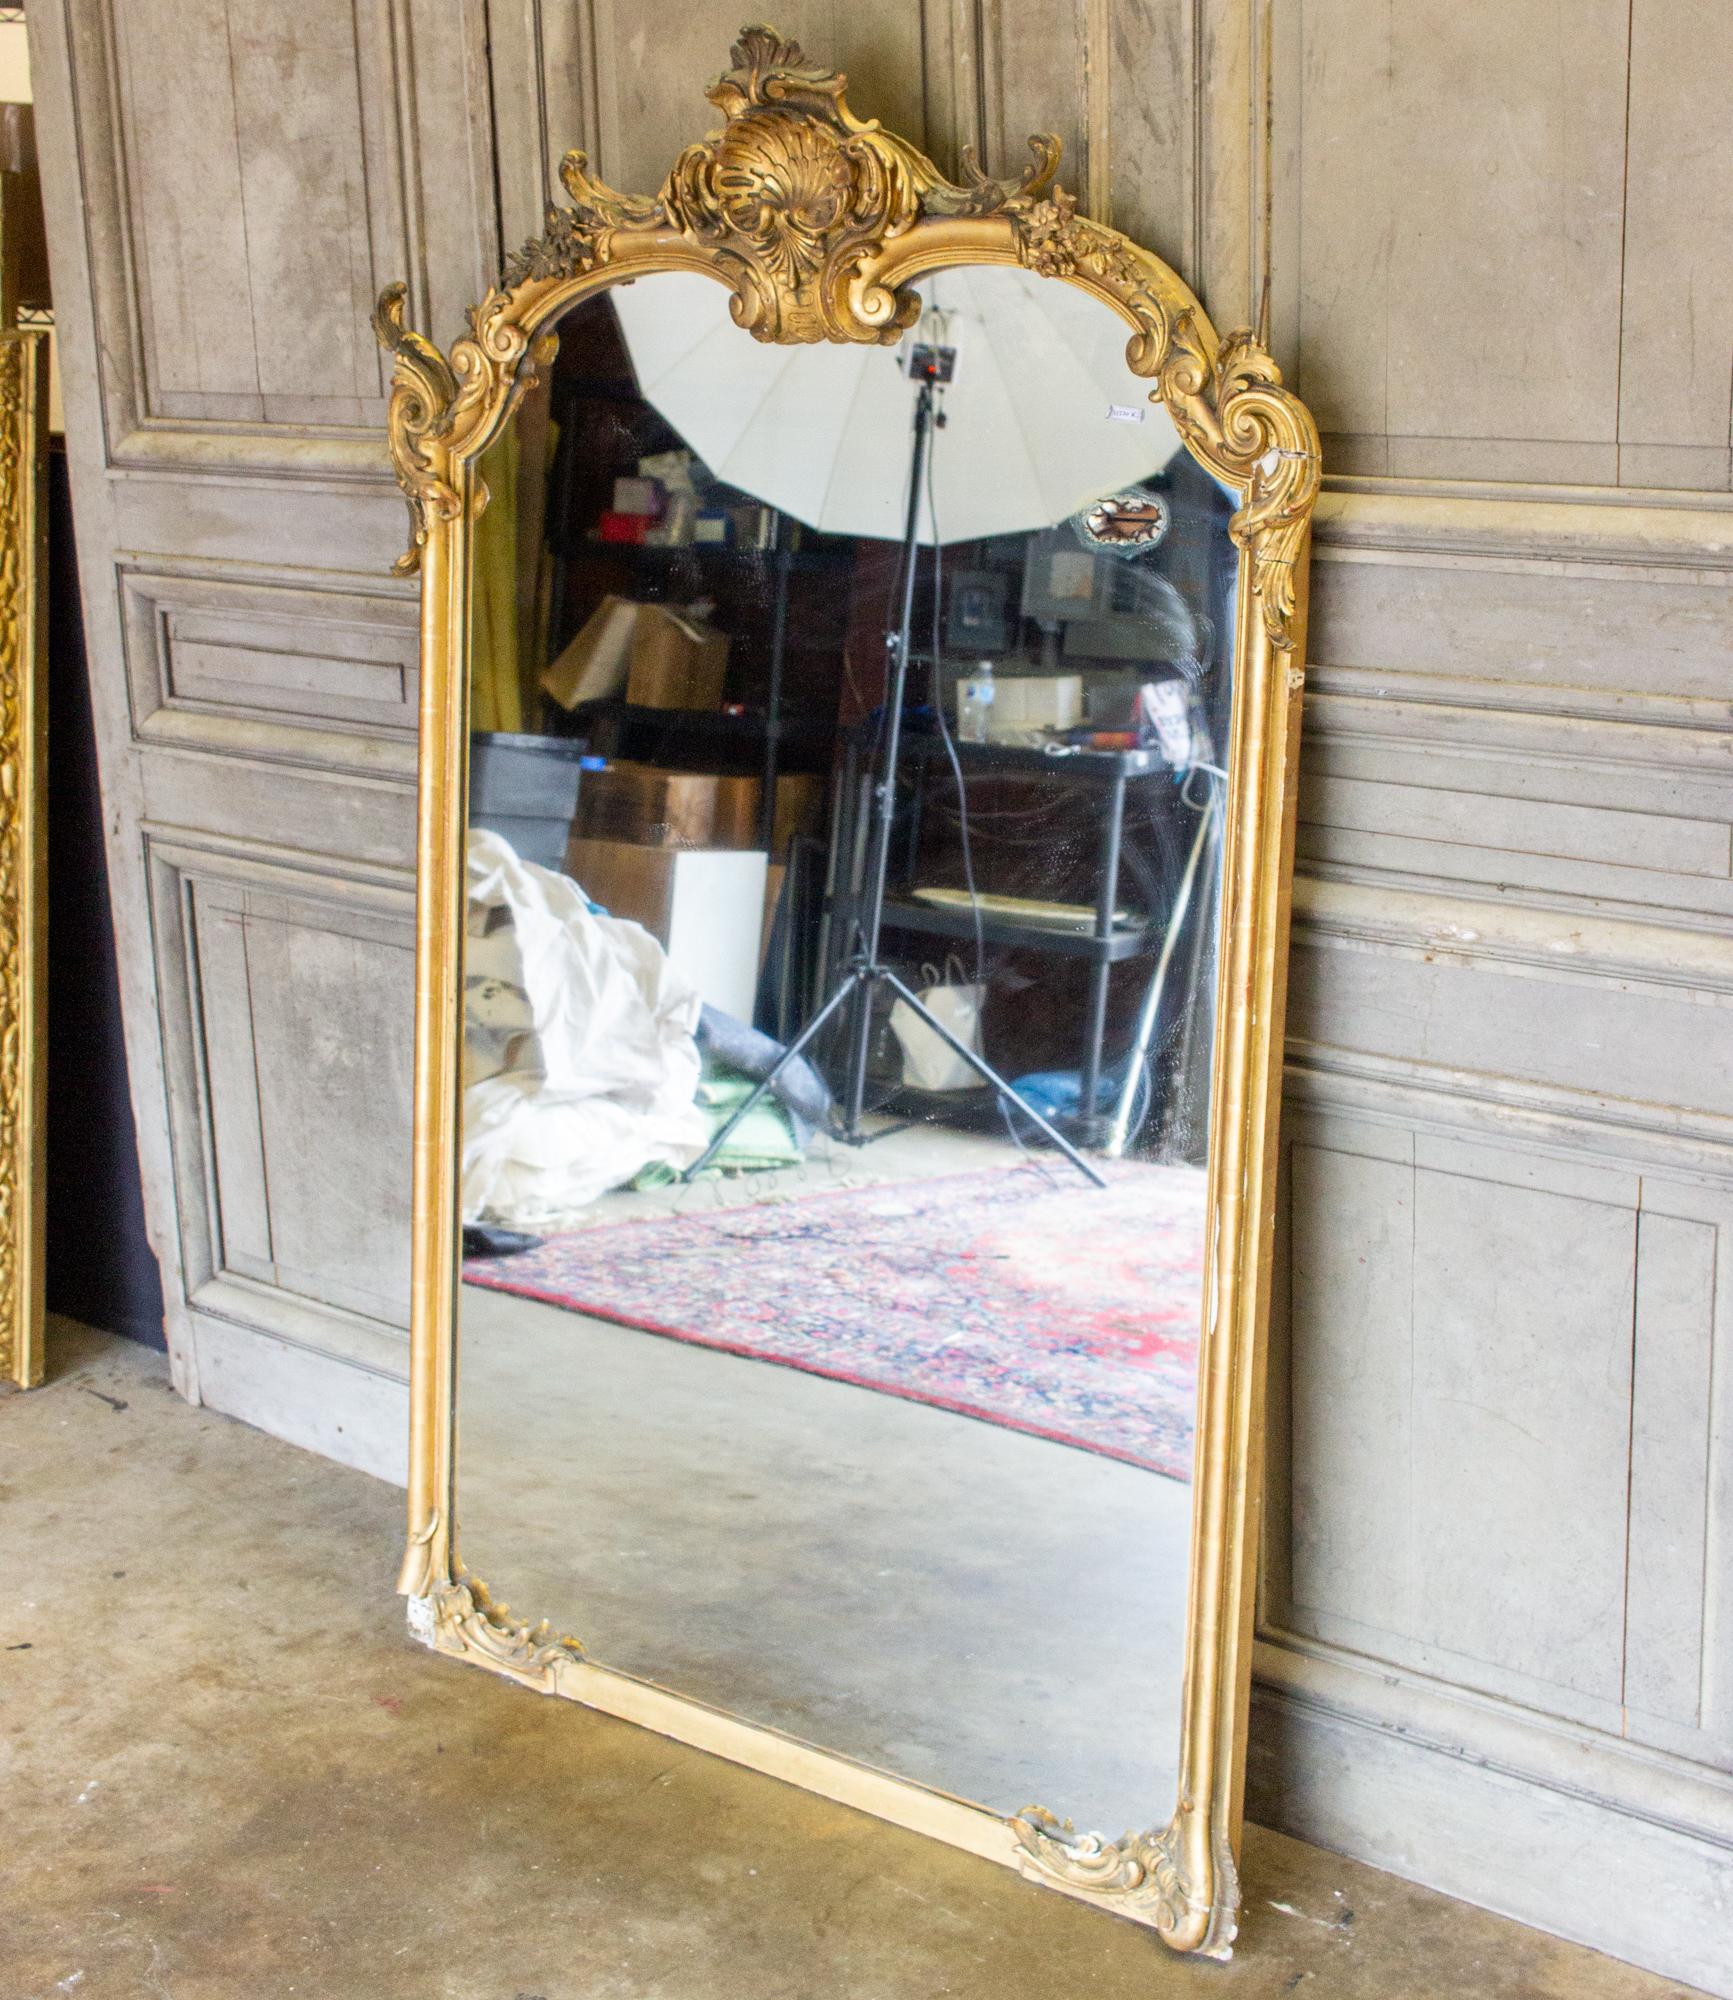 This beautifully decorated French gilt full-length mirror features a large and ornate shell cartouche at the top as well as floral carvings and scroll work at each side, corner and surrounding the cartouche. The mirror is in good shape, with one